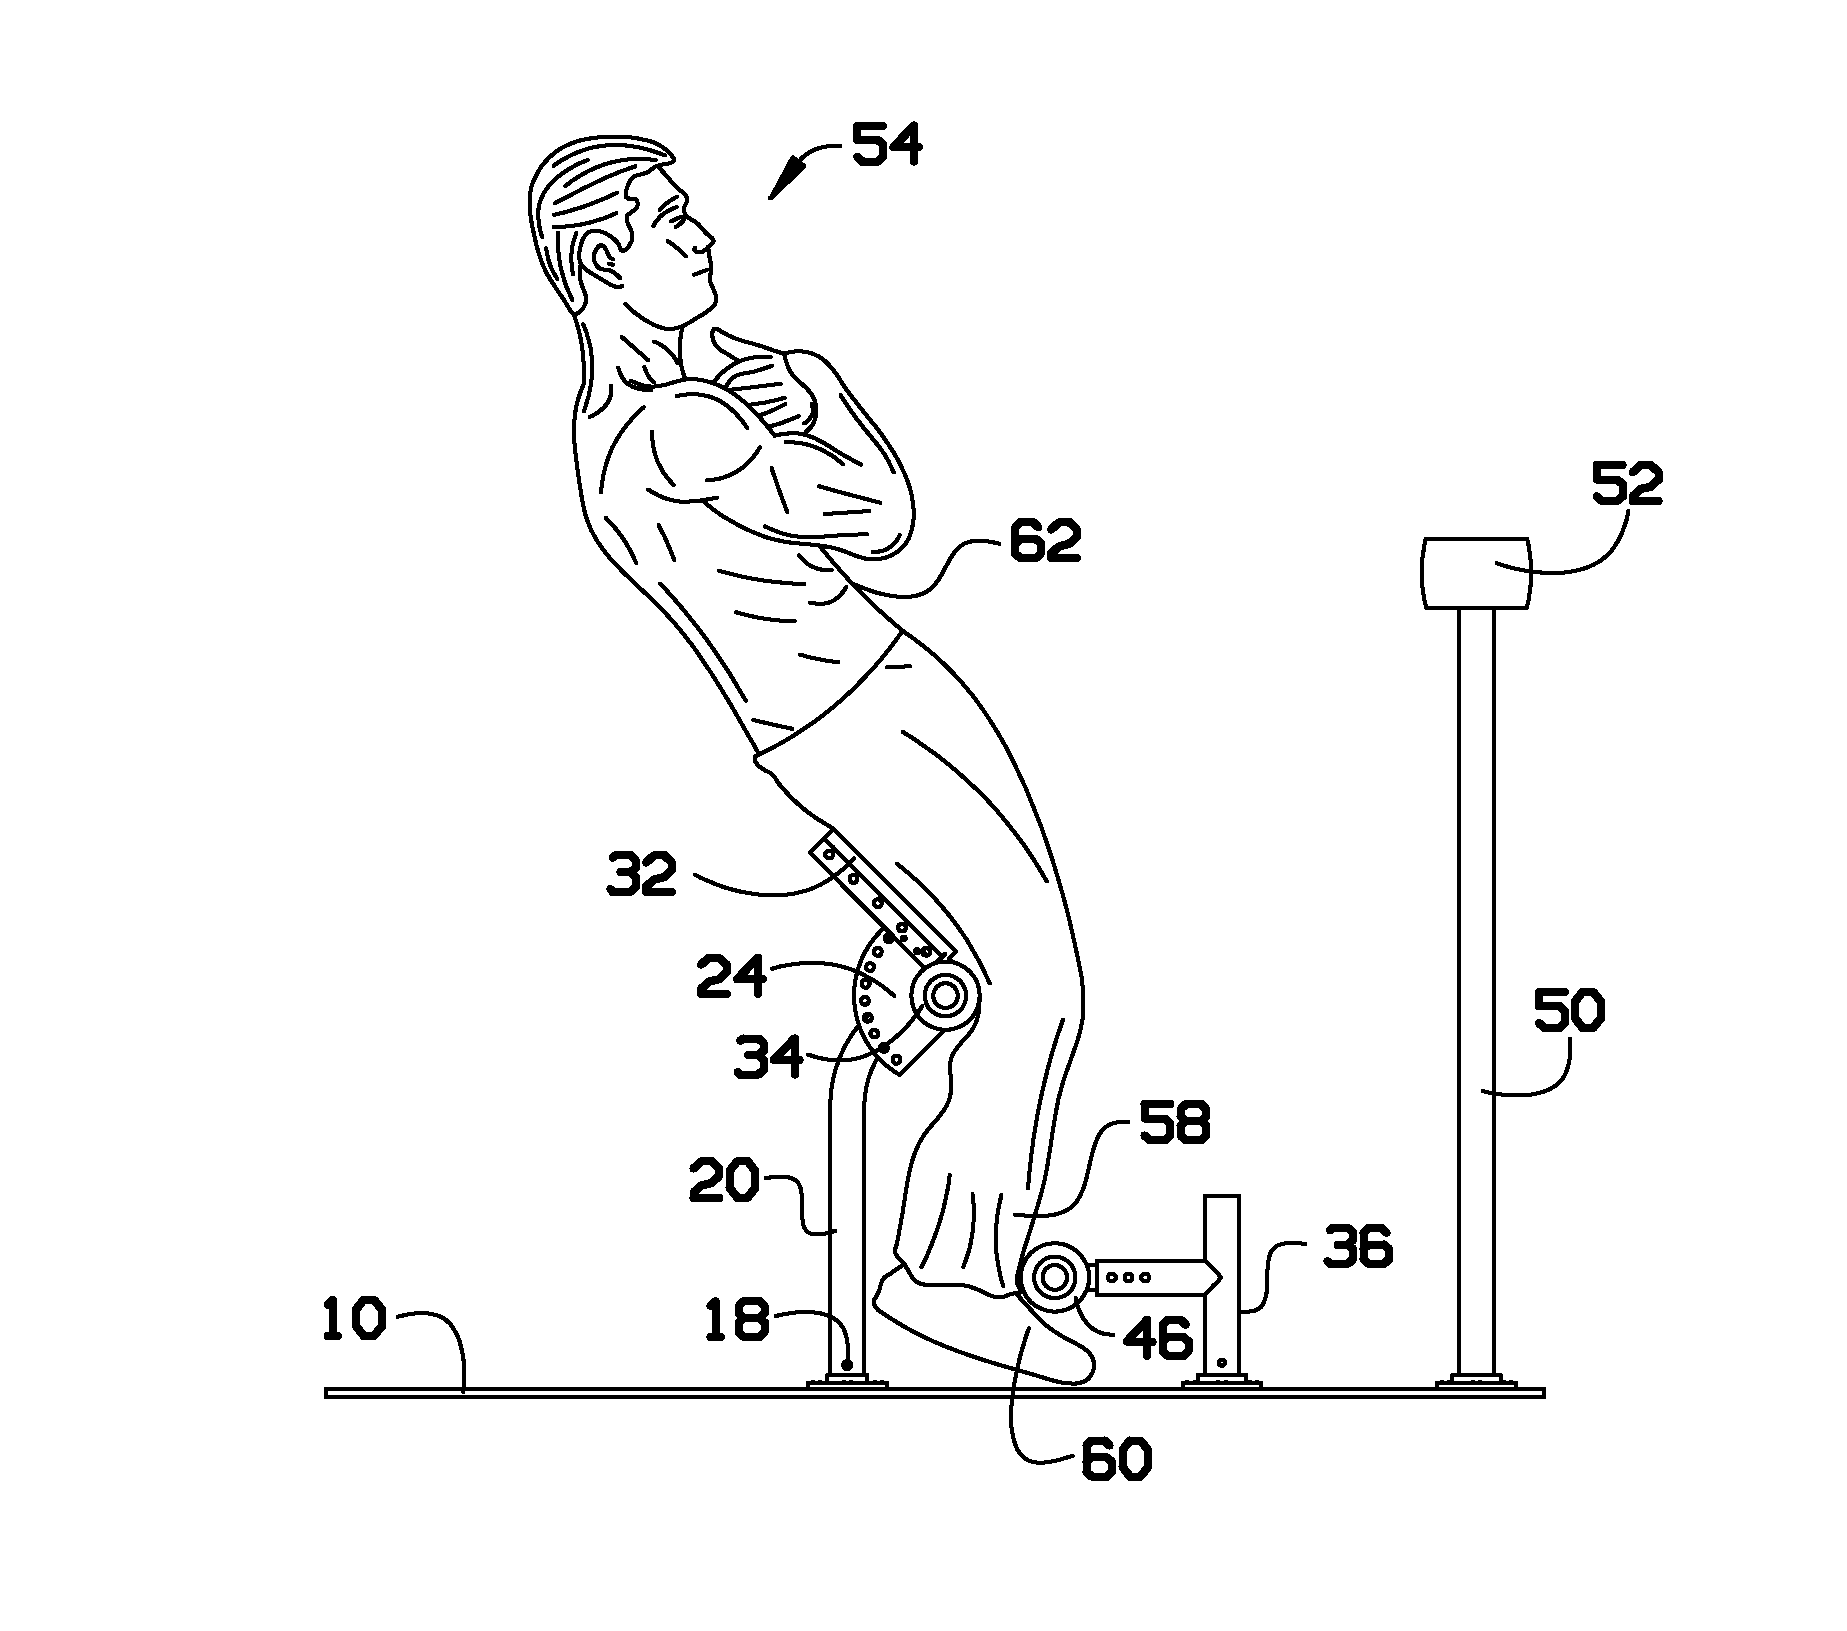 Abdominal/back muscle exercise device